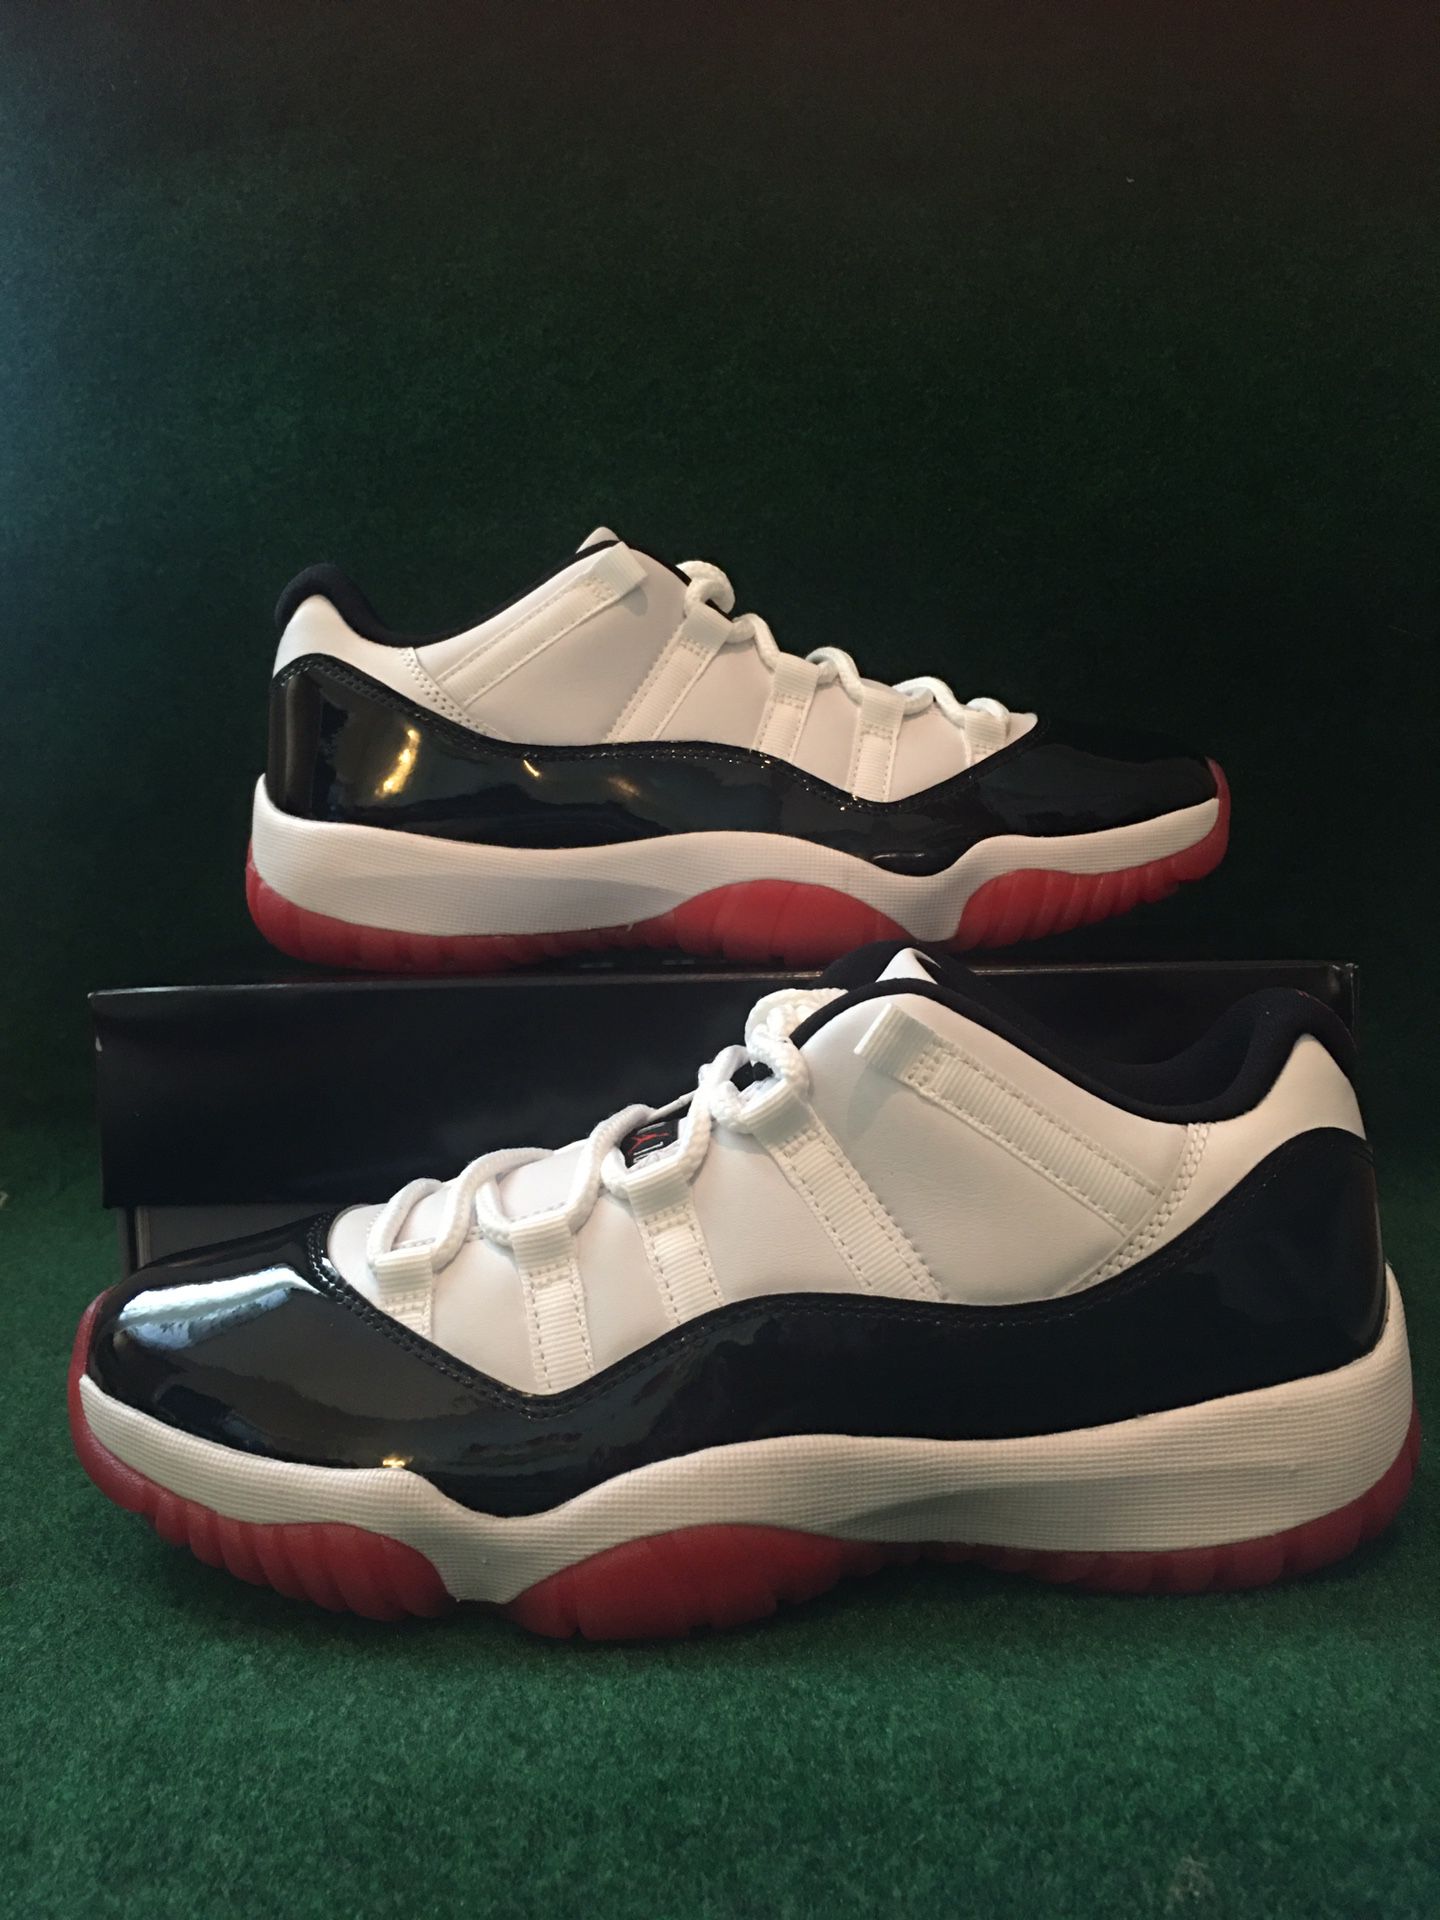 Jordan 11 low concord bred brand new Ds size 8.5